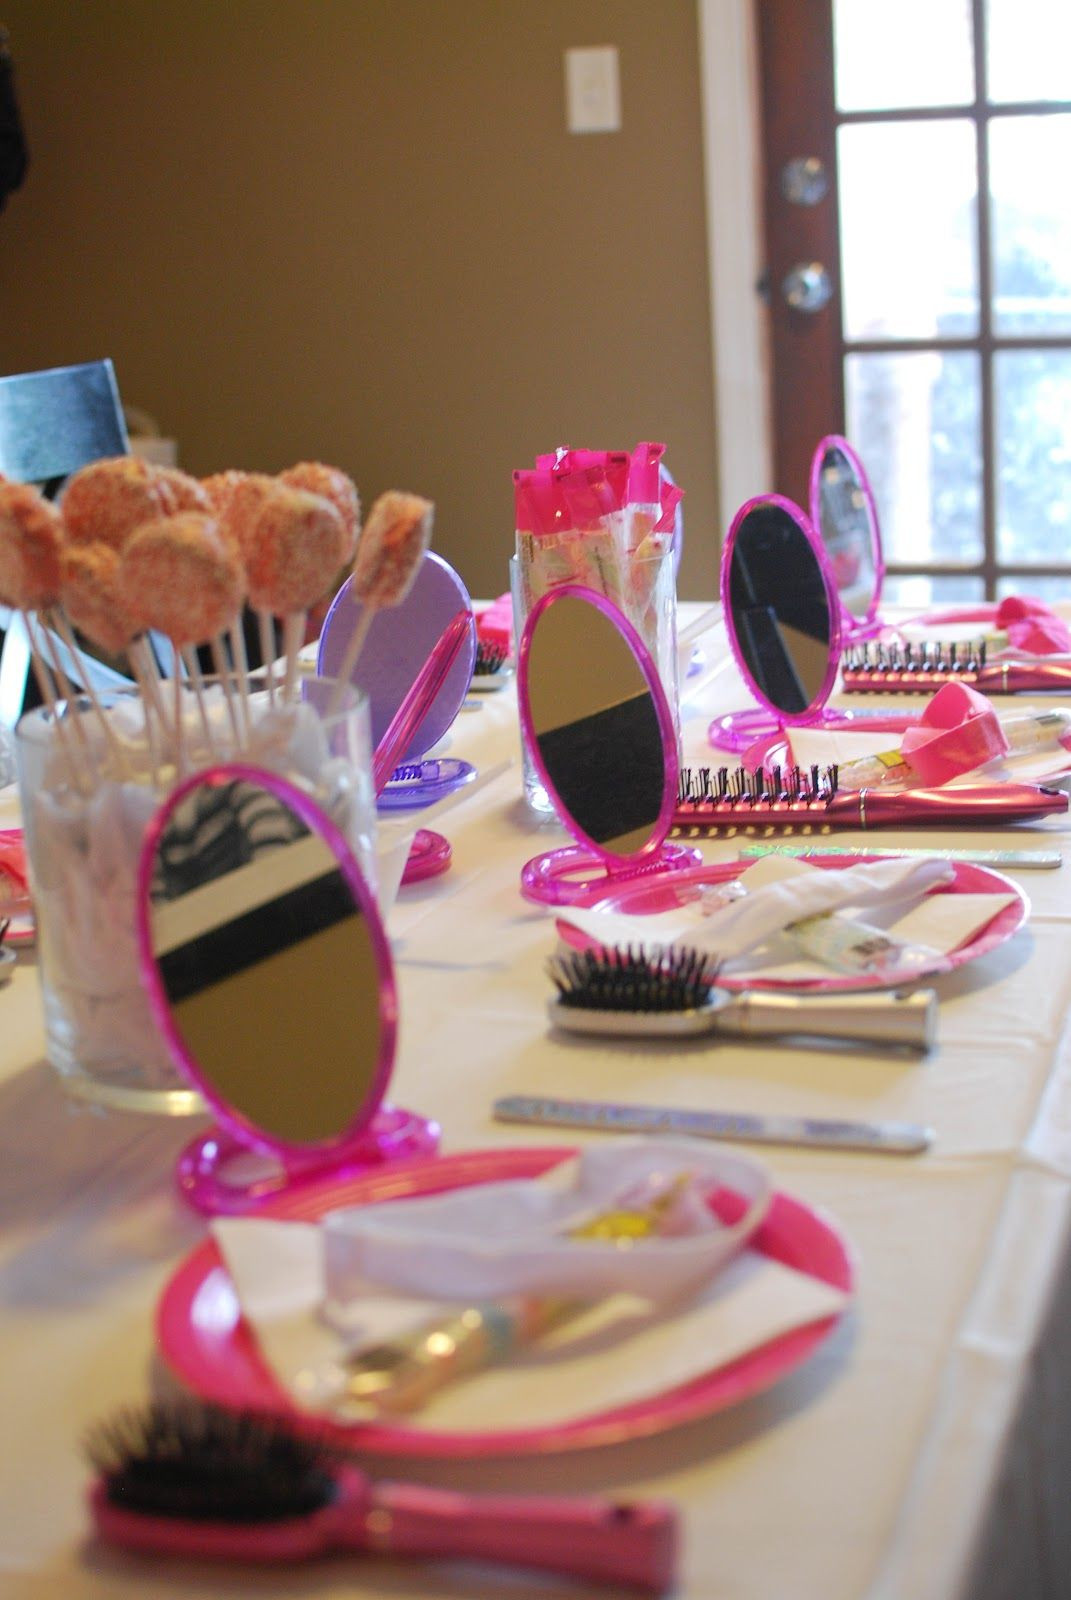 9 Yr Old Girl Birthday Party Ideas
 spa party ideas for 8 yr old girls remember this for the